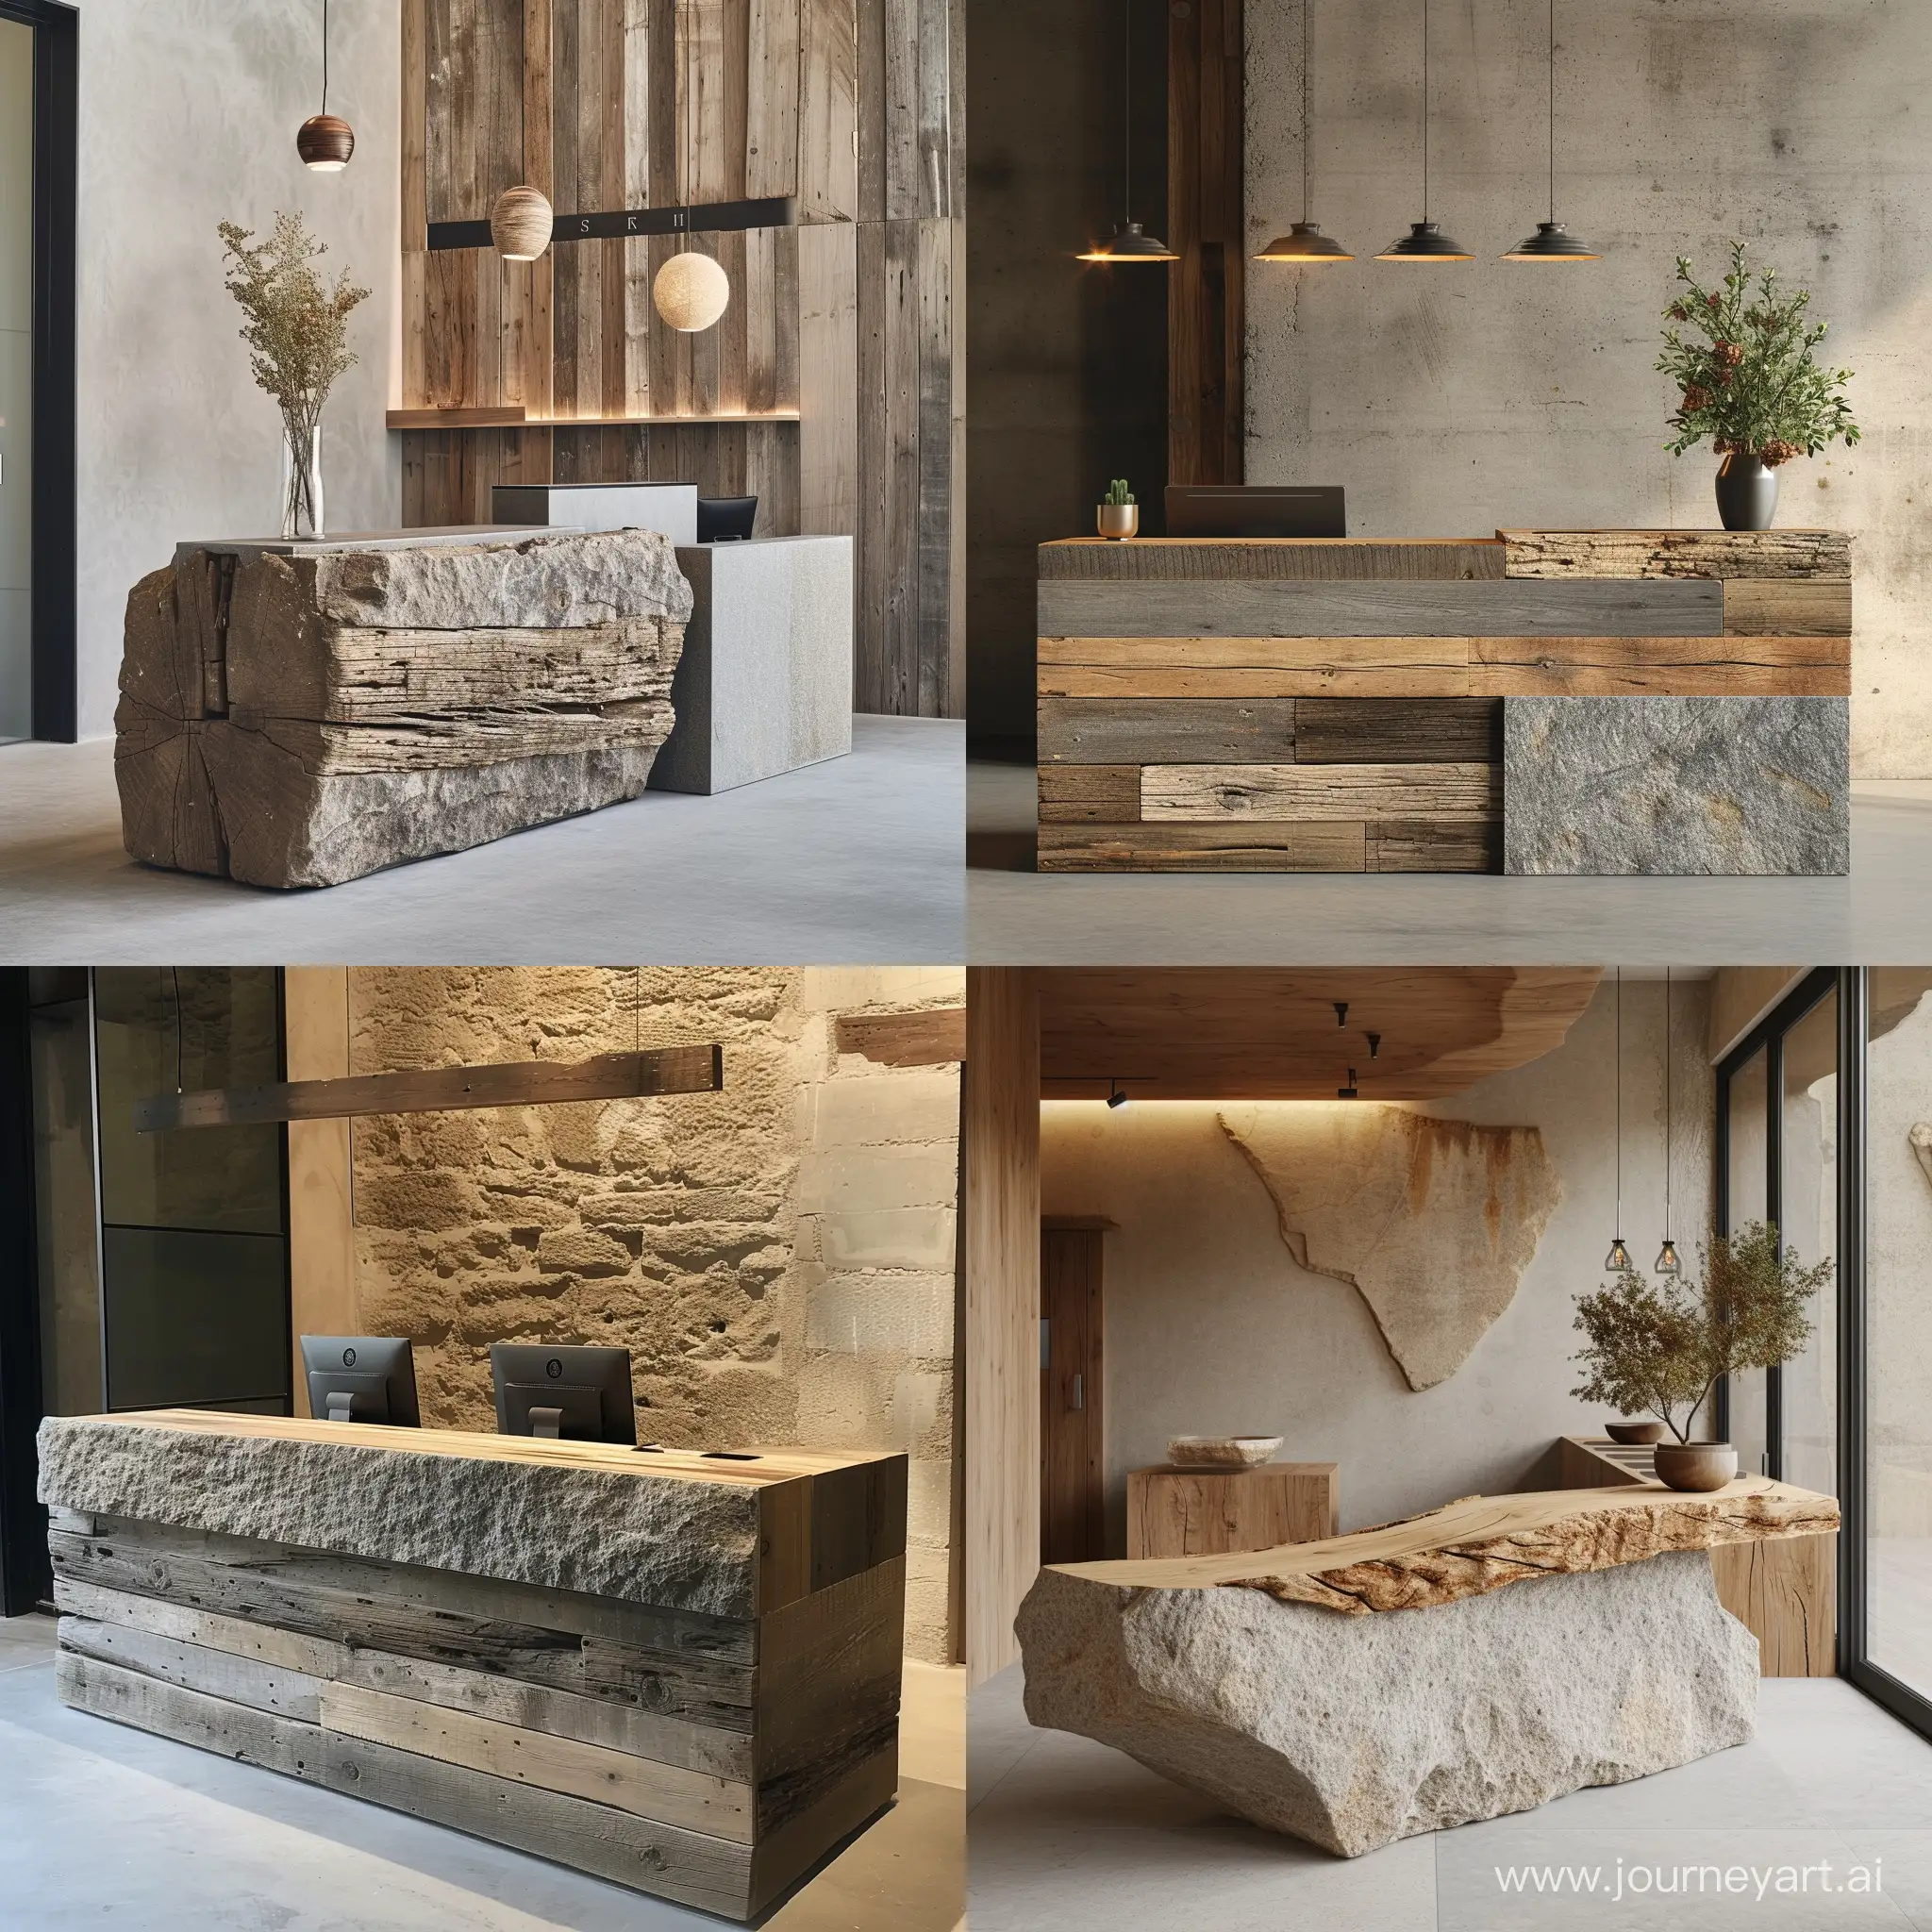 Sustainable-Reception-Desk-Crafted-from-Reclaimed-Wood-and-Stone